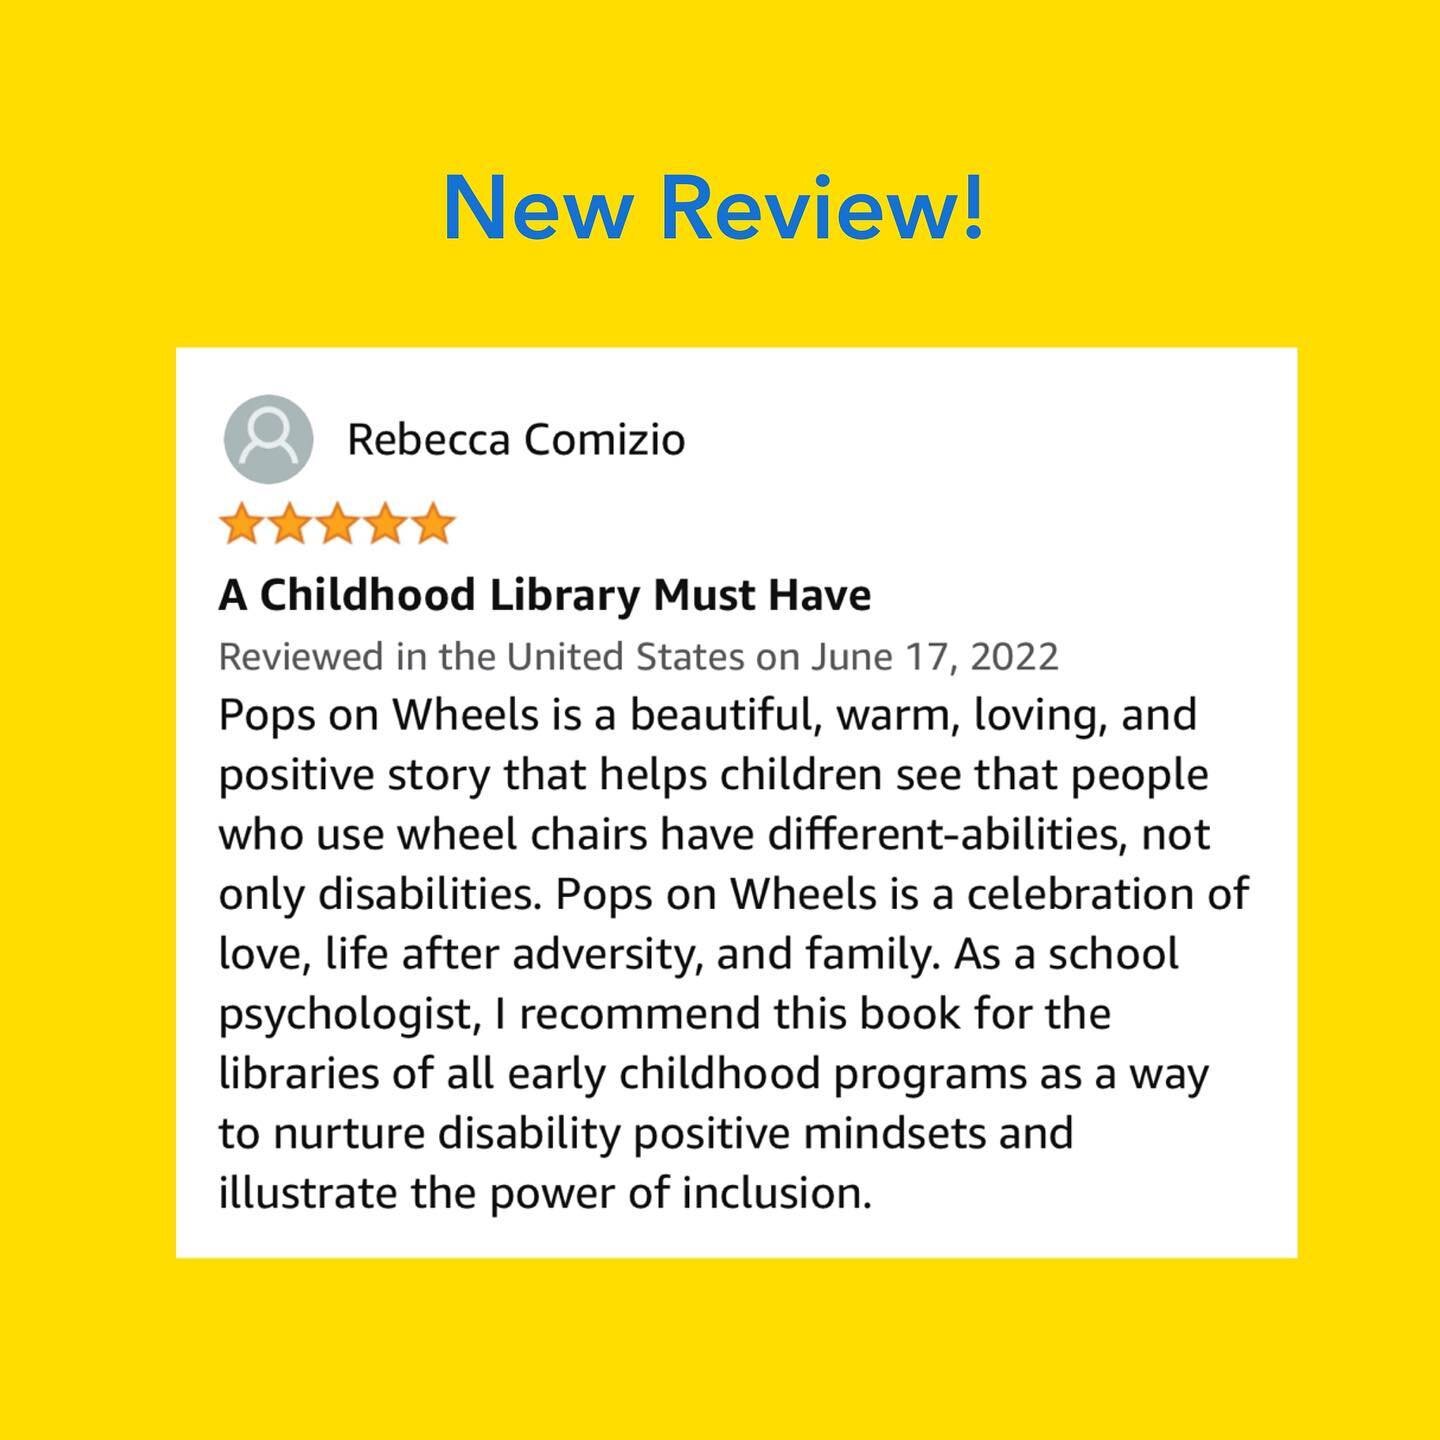 School Psychologist recommended! Thank you @beccacomiz for the thoughtful review! And for more resources check out her amazing book &ldquo;The Resilience Workbook for Kids.&rdquo; 💙💛❤️💛